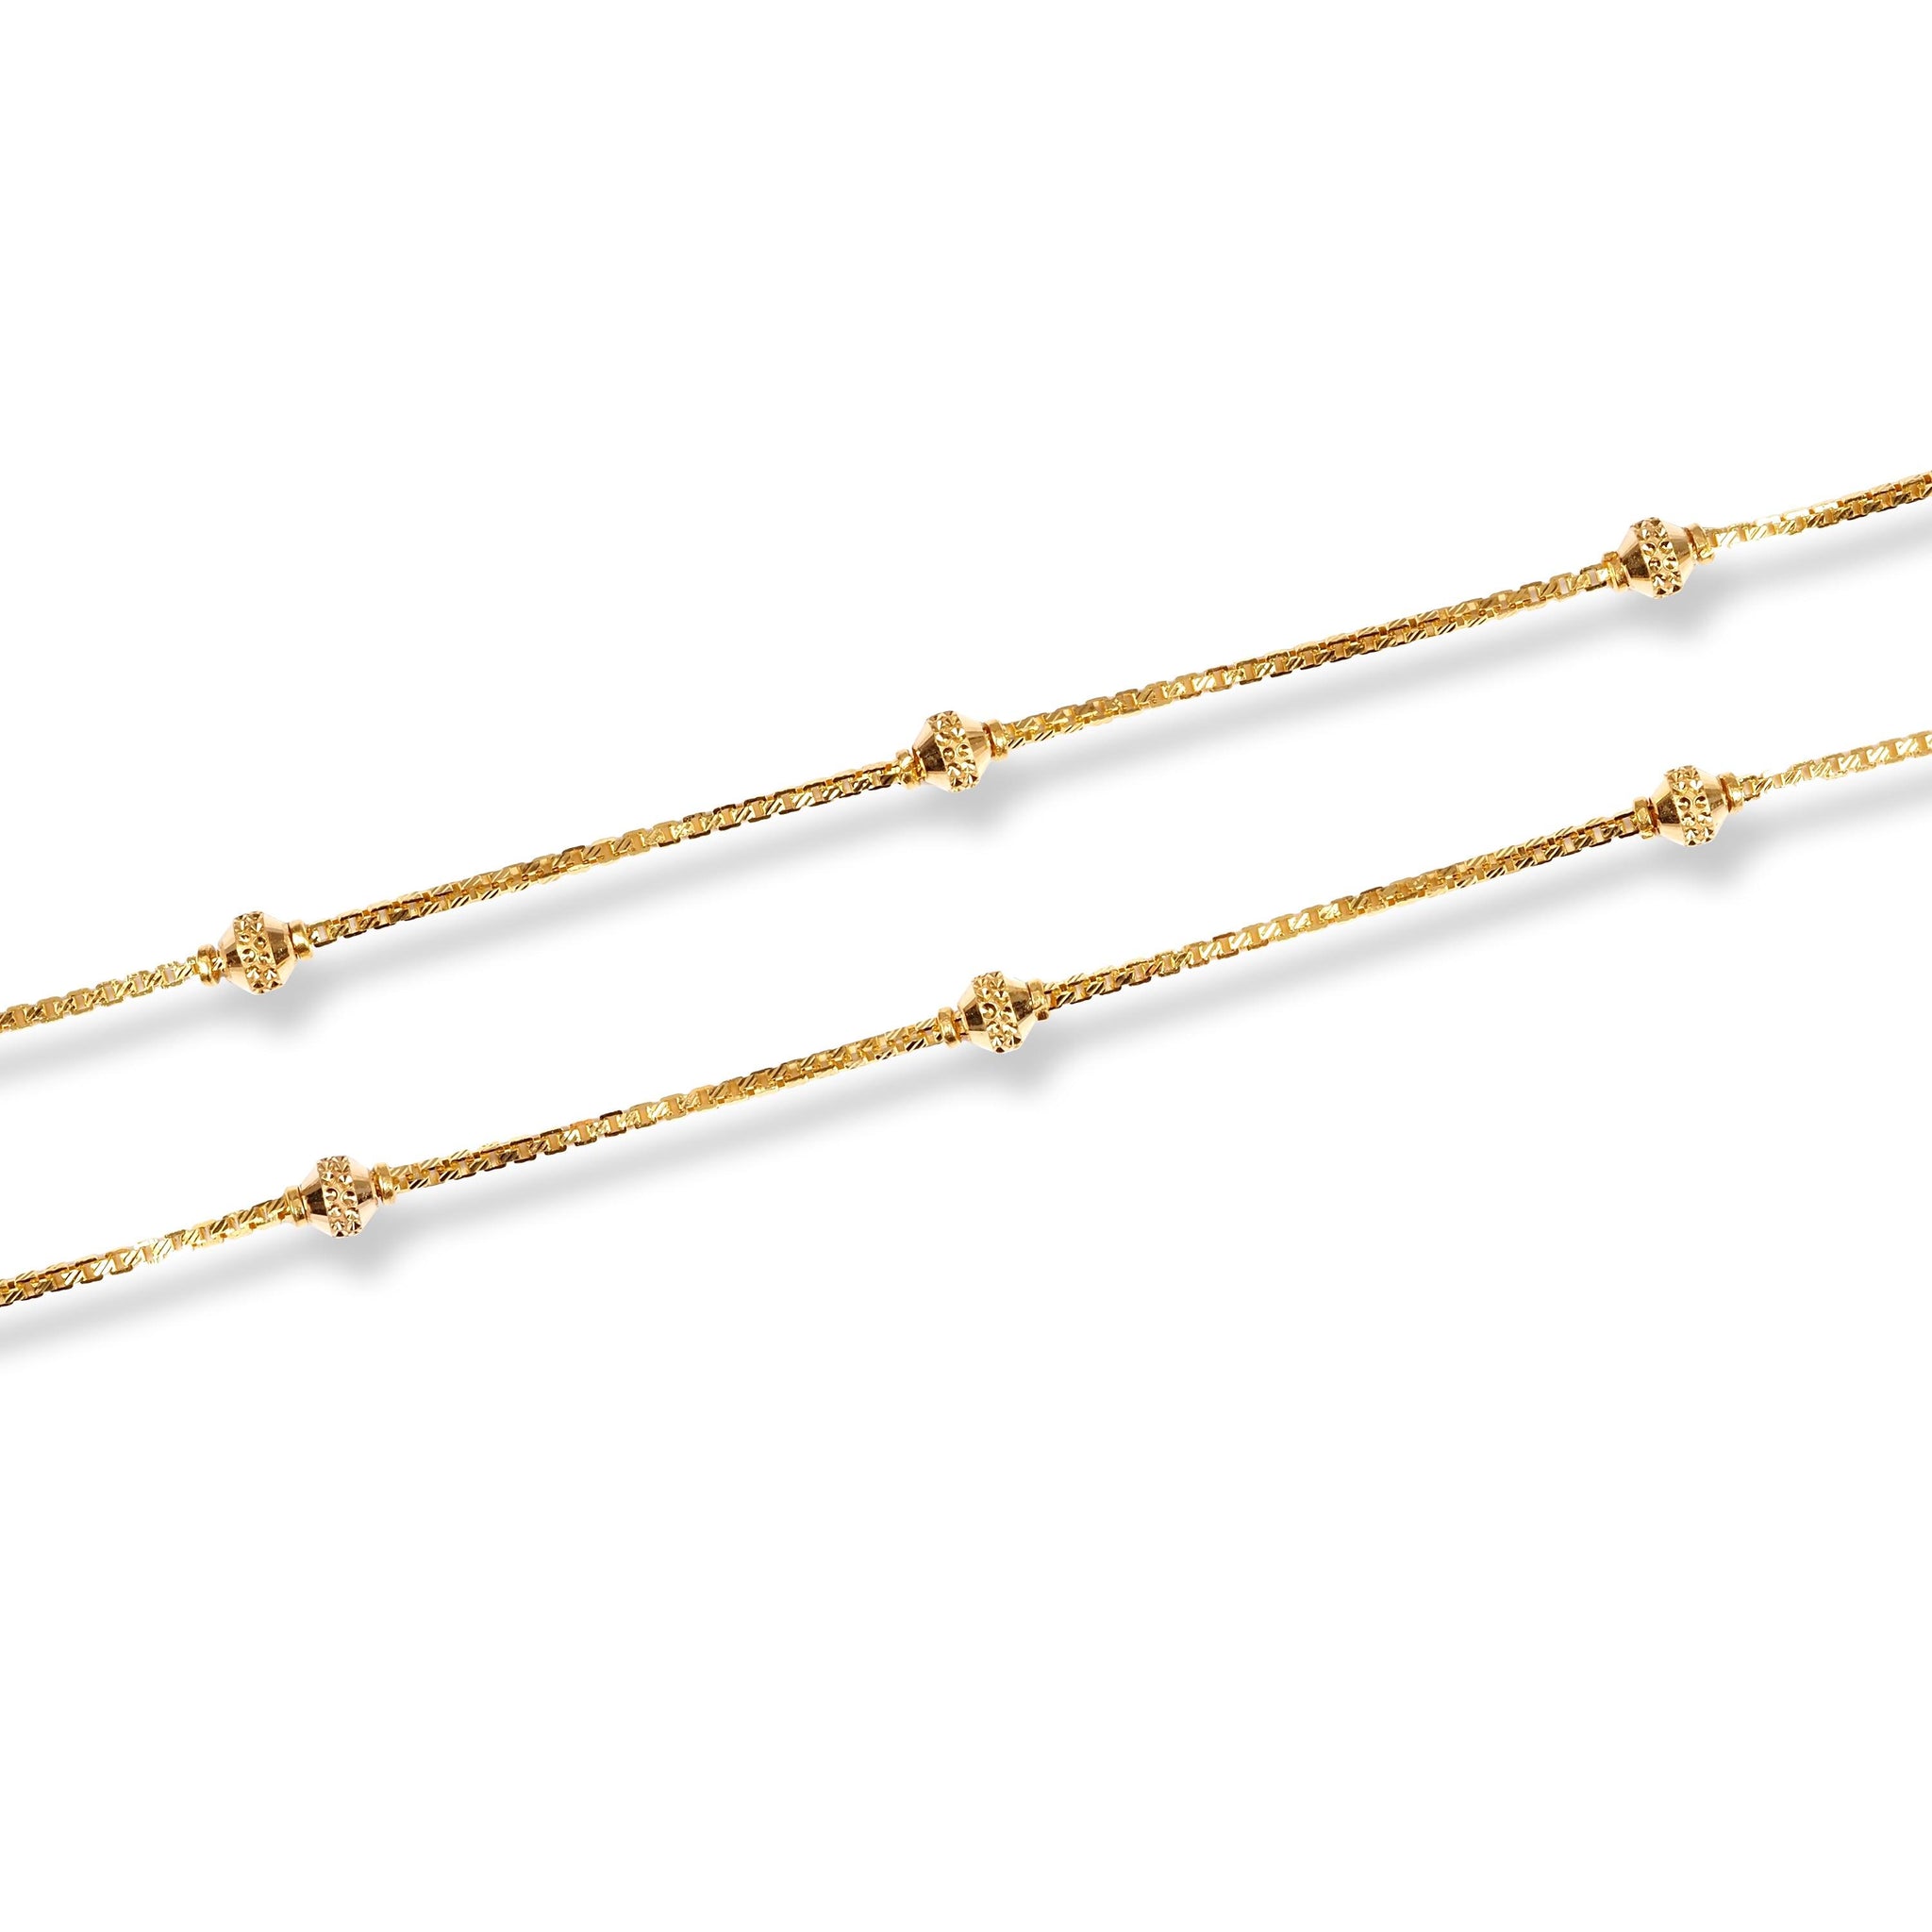 22ct Gold Box Chain With Diamond Cut Beads and Hook Clasp C-7148